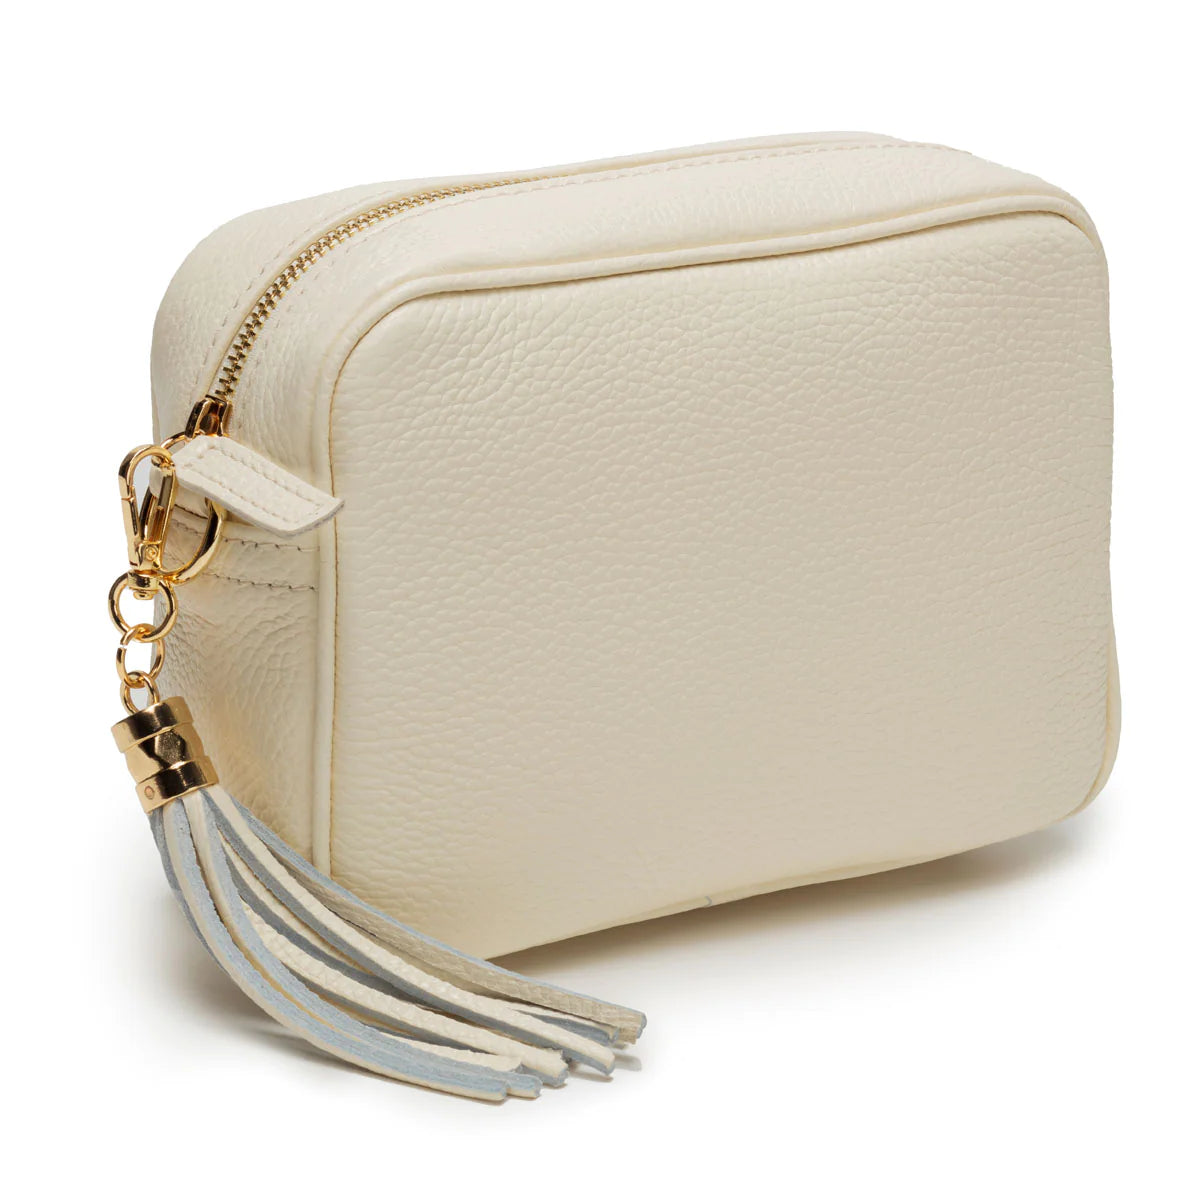 Elie Beaumont - Tassle Cream Bag [Extra Strap included]